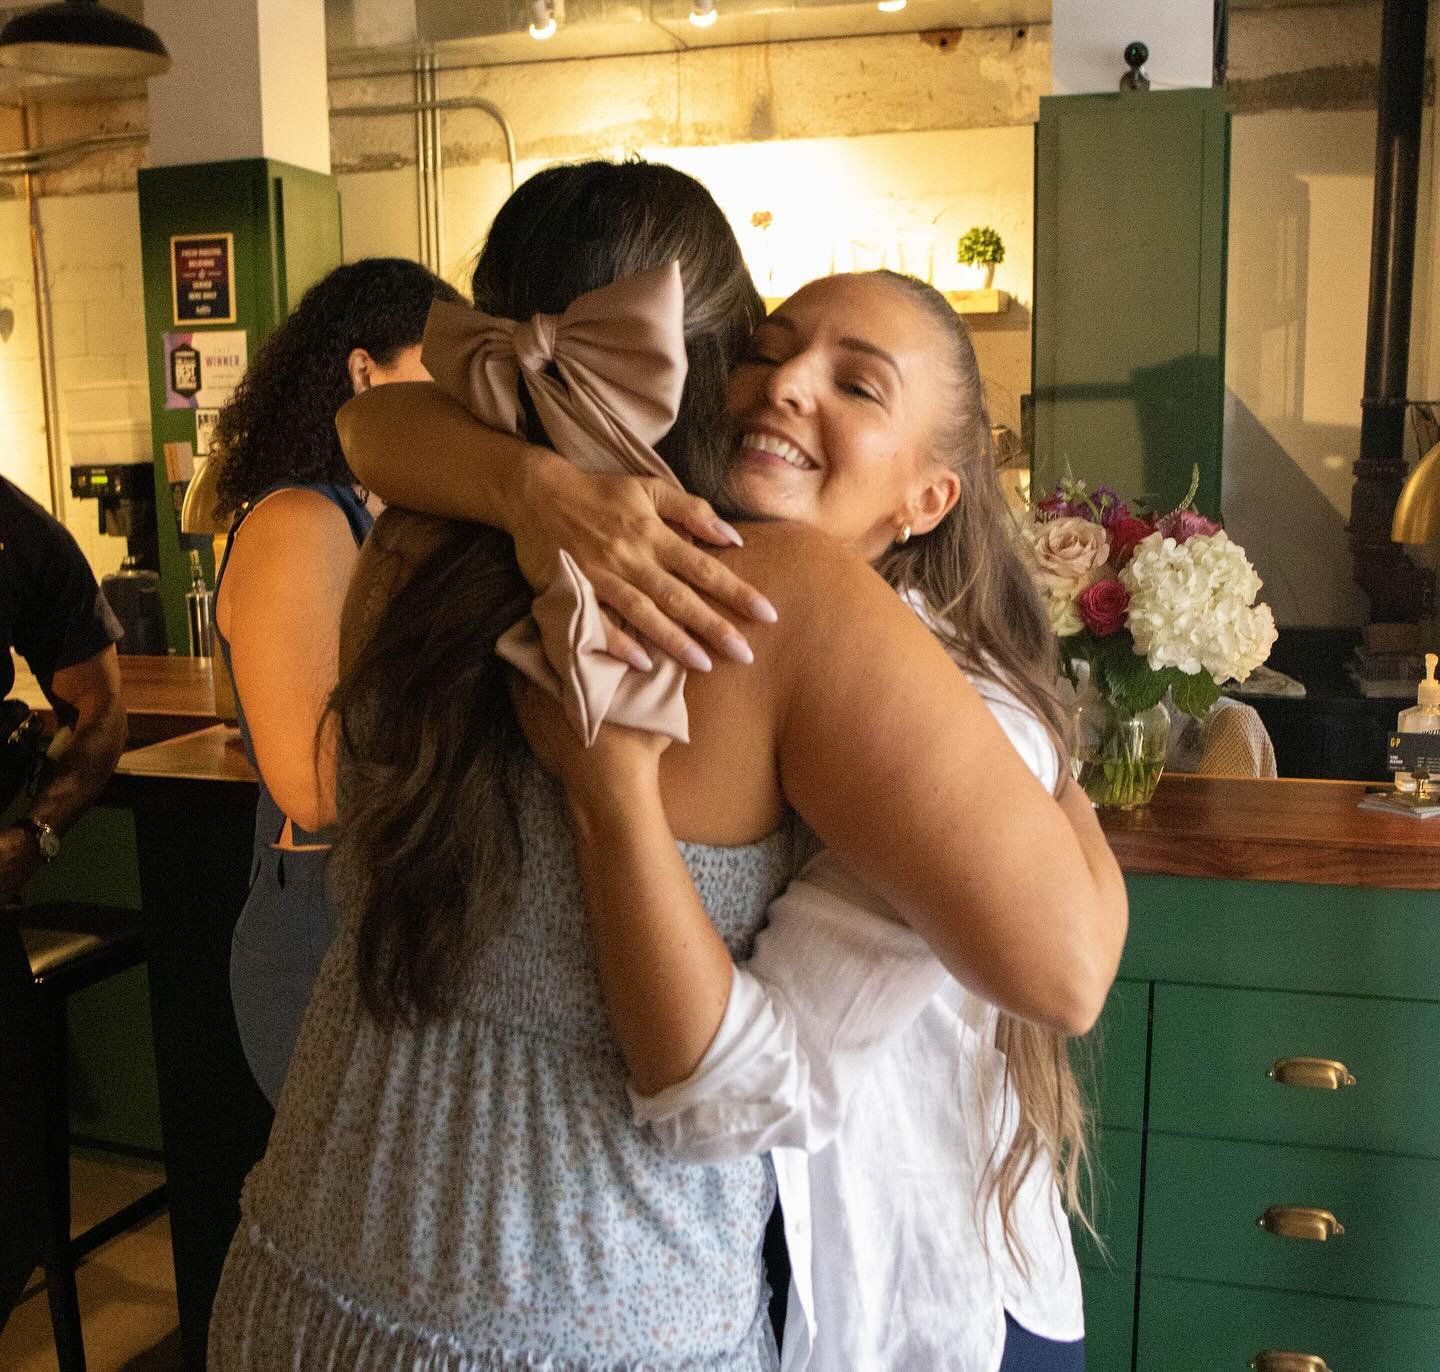 Sunday post-service hugs and convos are where it&rsquo;s at!

#downtownfortlauderdale #churchflow